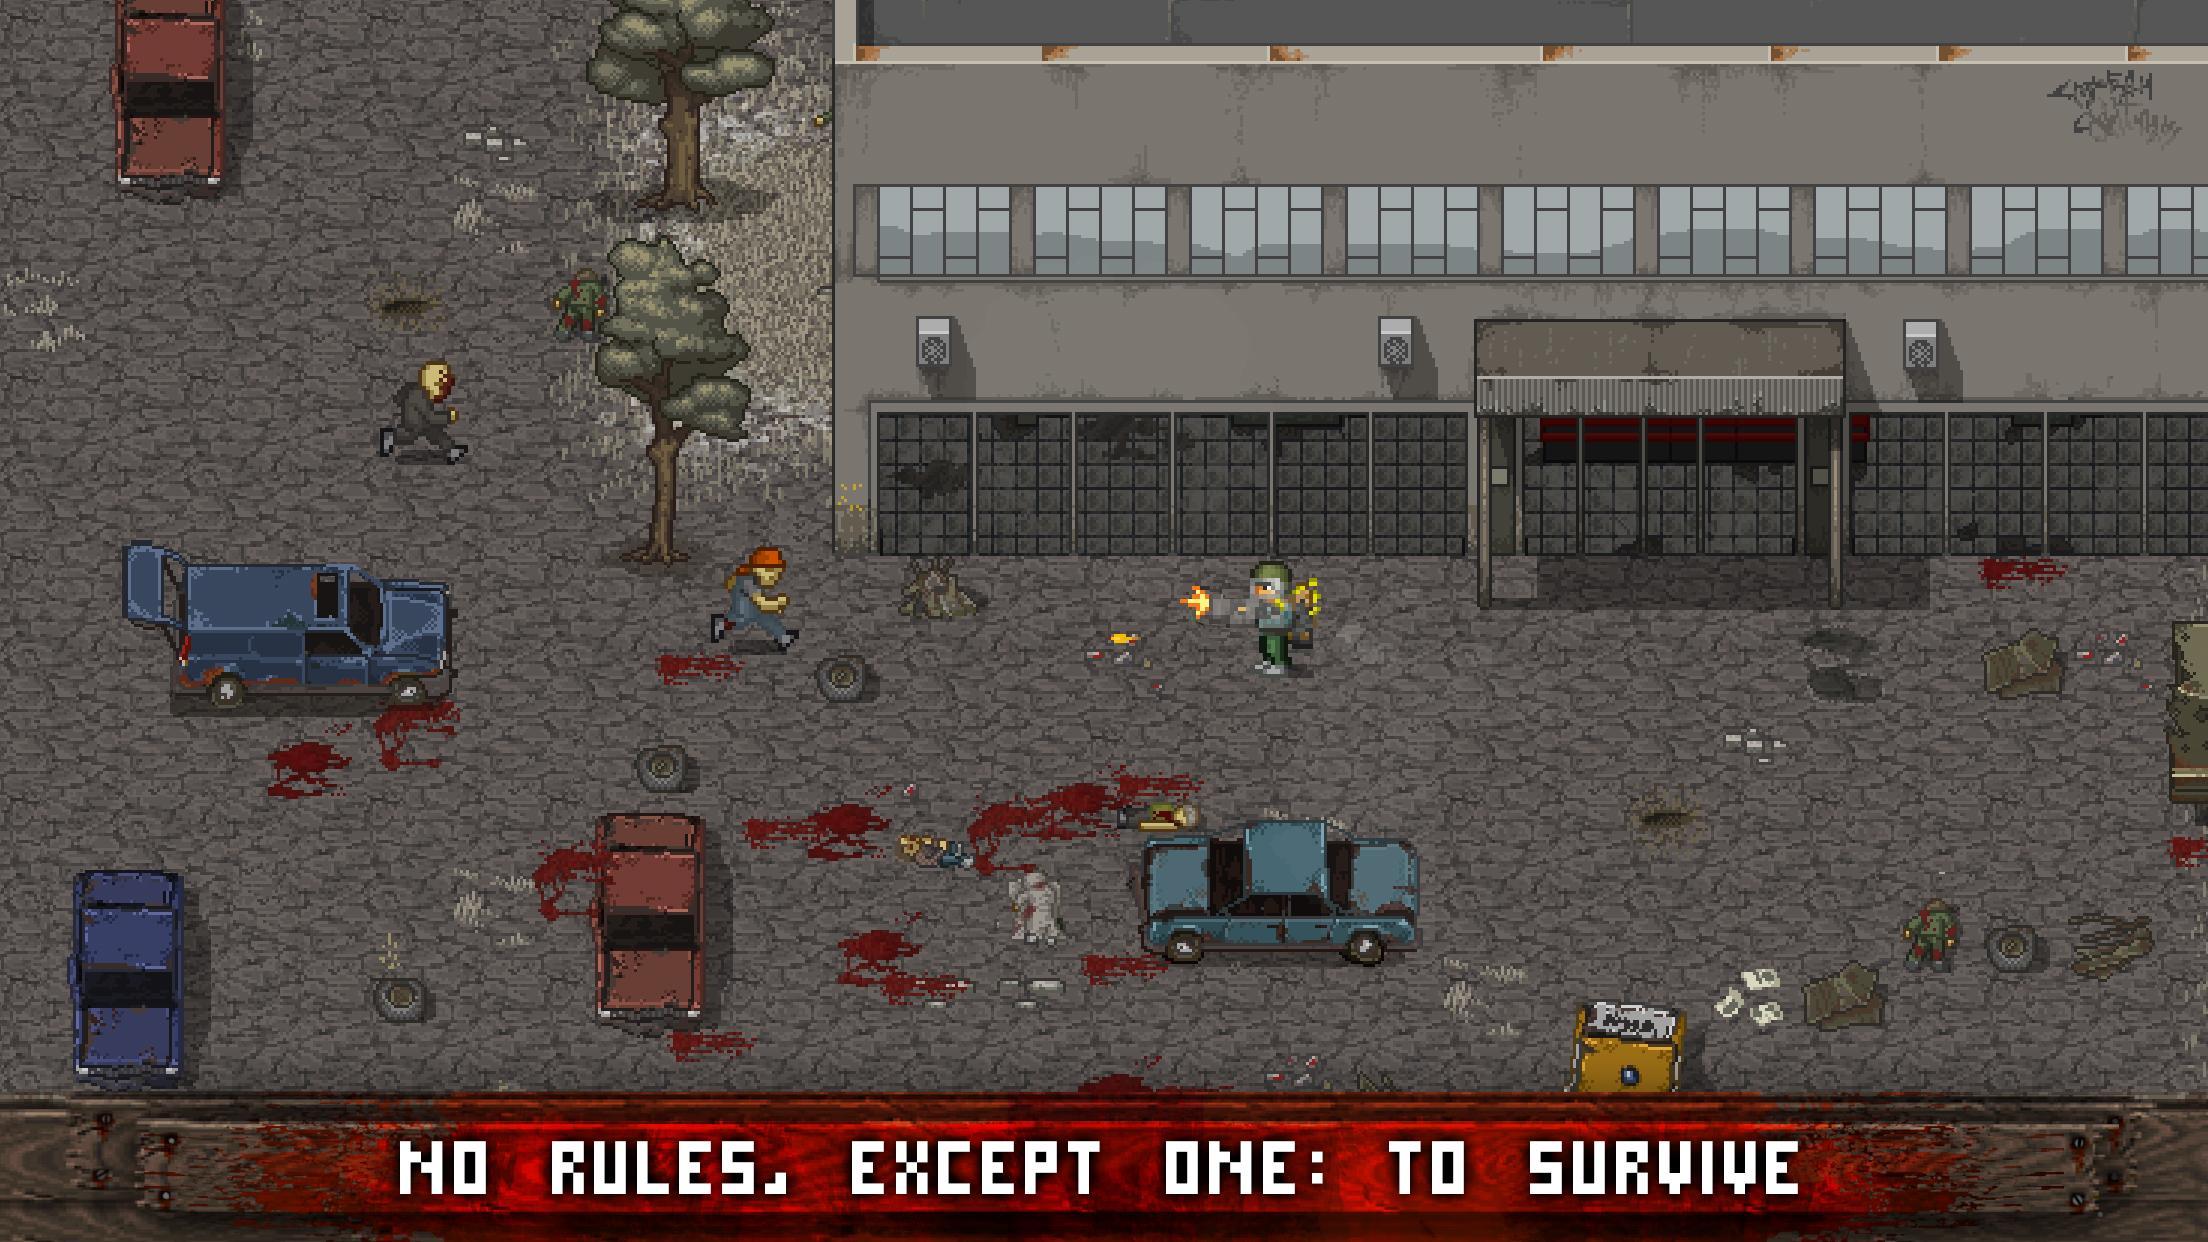 Top 3 games to play offline at school - Mini DAYZ: Zombie Survival